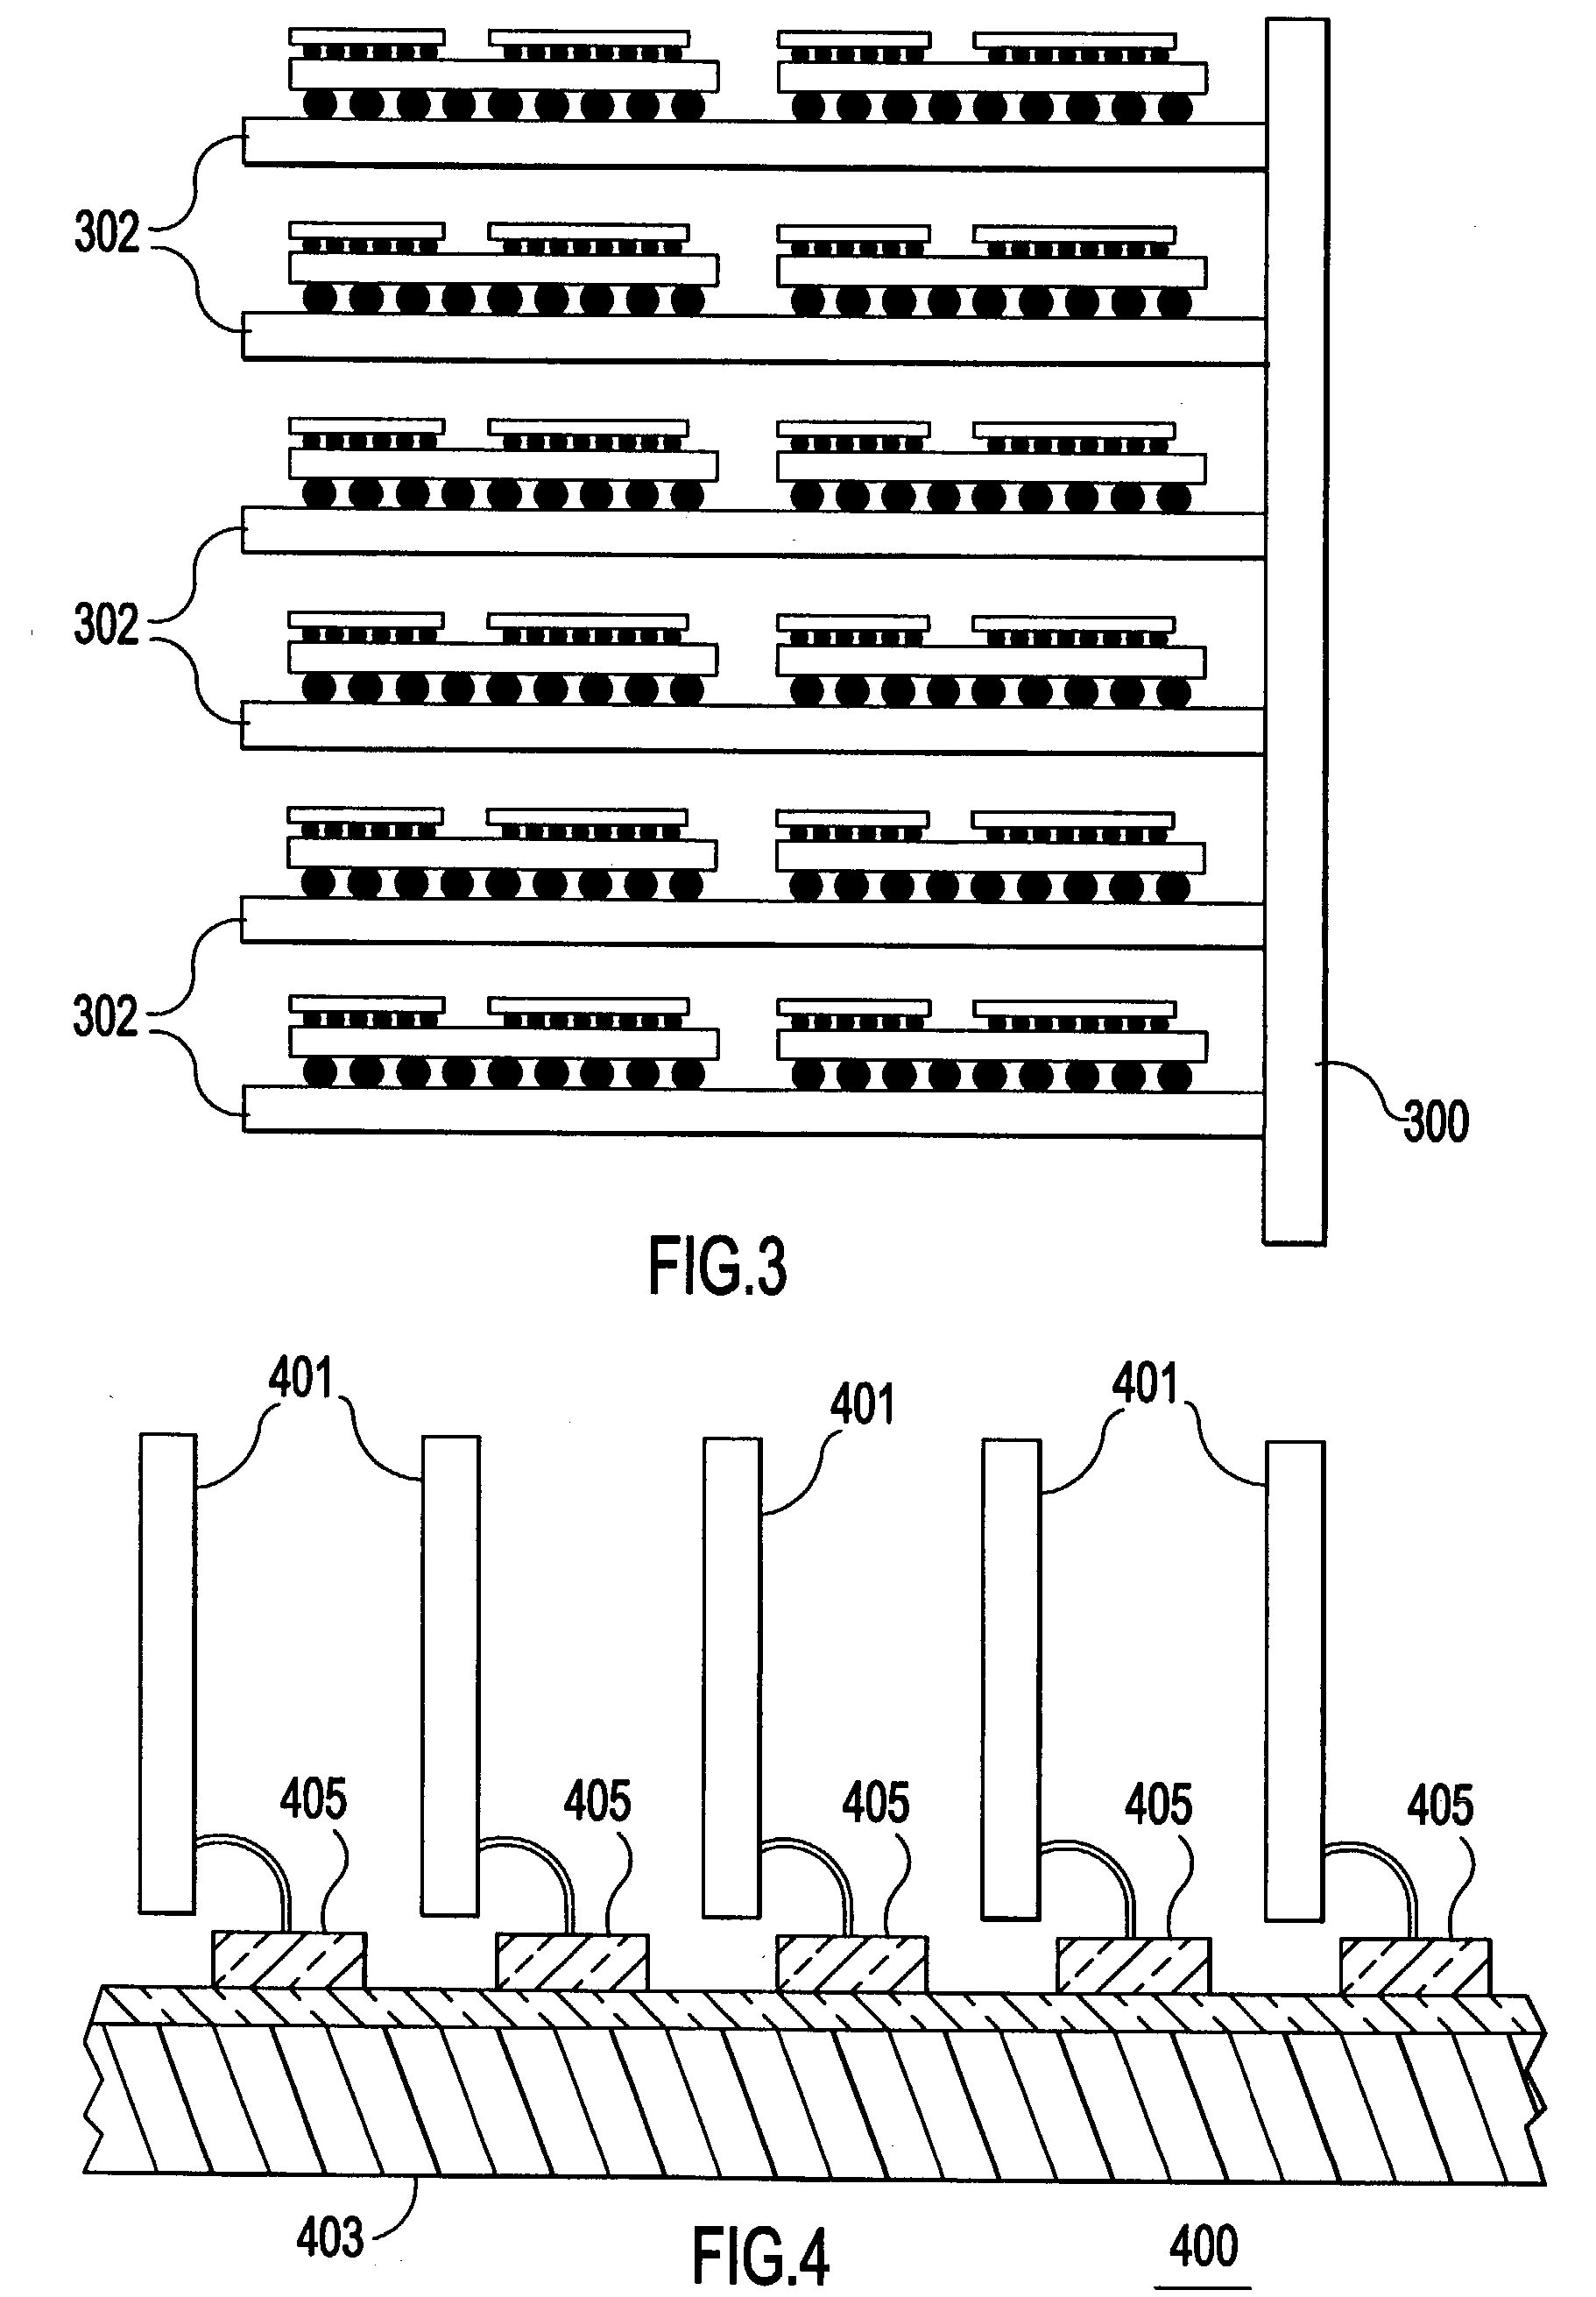 Optically connectable circuit board with optical component(s) mounted thereon